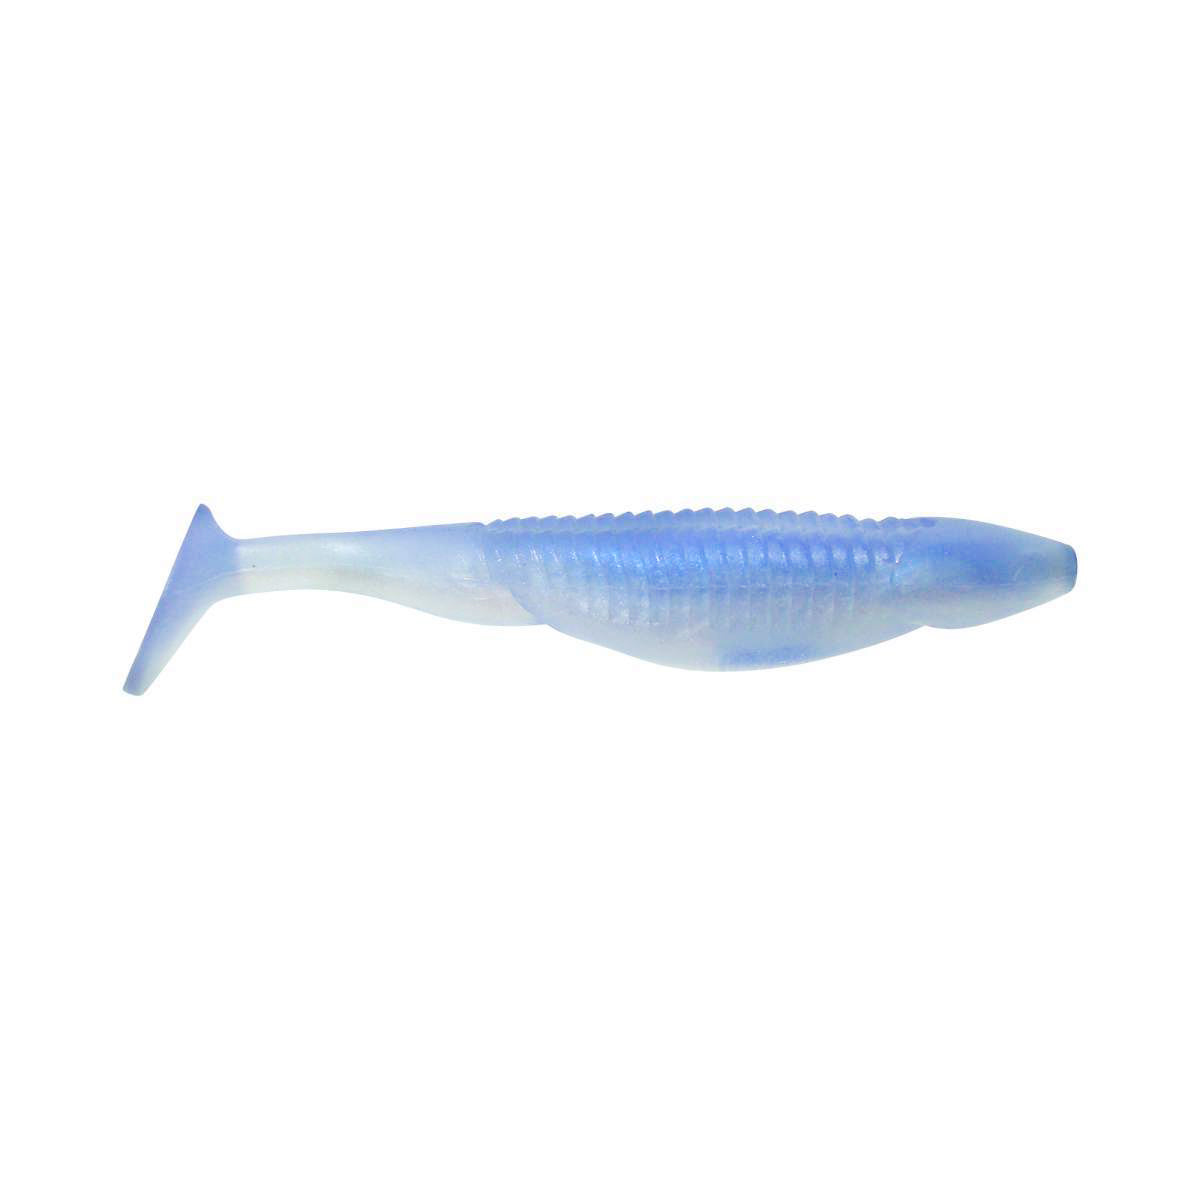 Reaction Innovations Skinny Dipper Sexy Shad